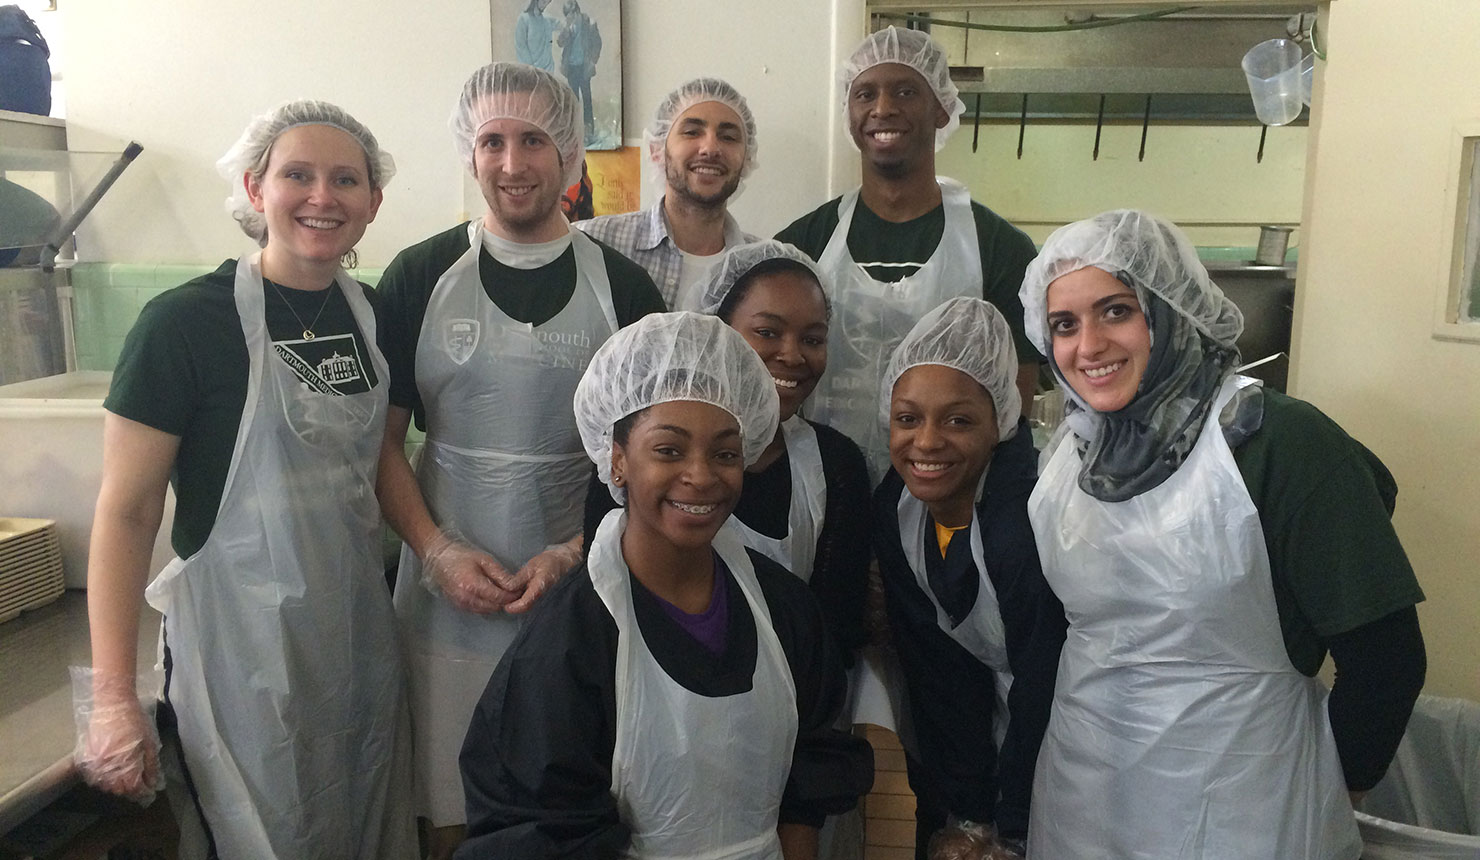 Aaron Briggs and fellow Geisel School of Medicine Urban Scholars and Xavier University undergraduates in New Orleans serving lunch at Ozanam Inn, a homeless shelter.

Front Row, left to right: T'Yanna Jackson, Miyah Davis, Torhianna Haydel, and Sarah Ghabbour '19.   Back row, left to right: Courtney Hanlon '19, Timothy Harris '19, Aaron Briggs '19,  and Spencer McFarlane '19.